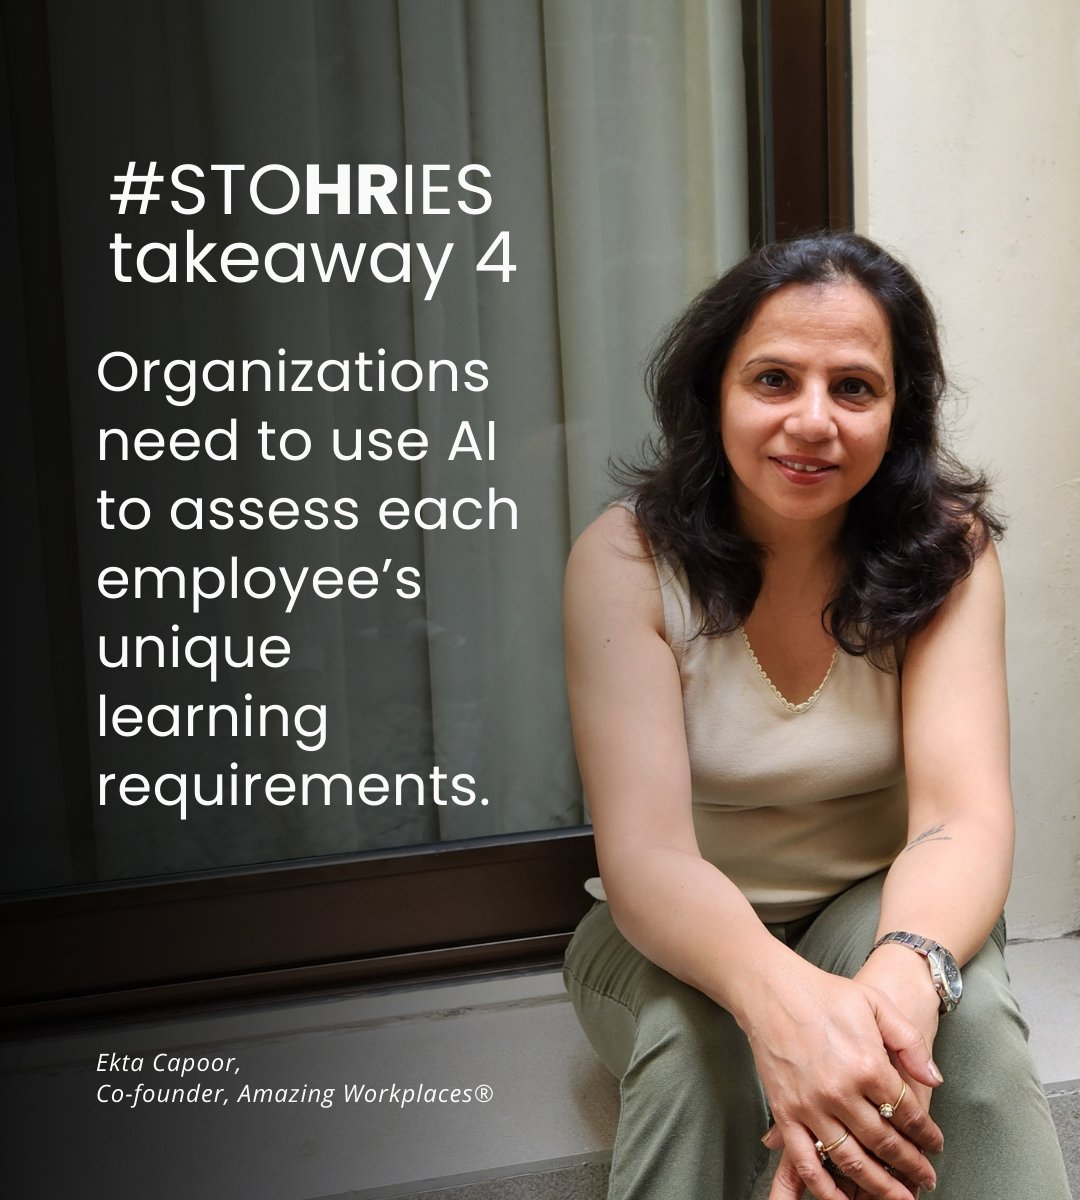 AI can help identify each learner's unique needs to enable organizations go beyond a one-size-fits-all approach and create a personalized learning journey for every participant.
#STOHRIES #HR #LearningAndDevelopment #PeopleManagement #AmazingWorkplaces #AI